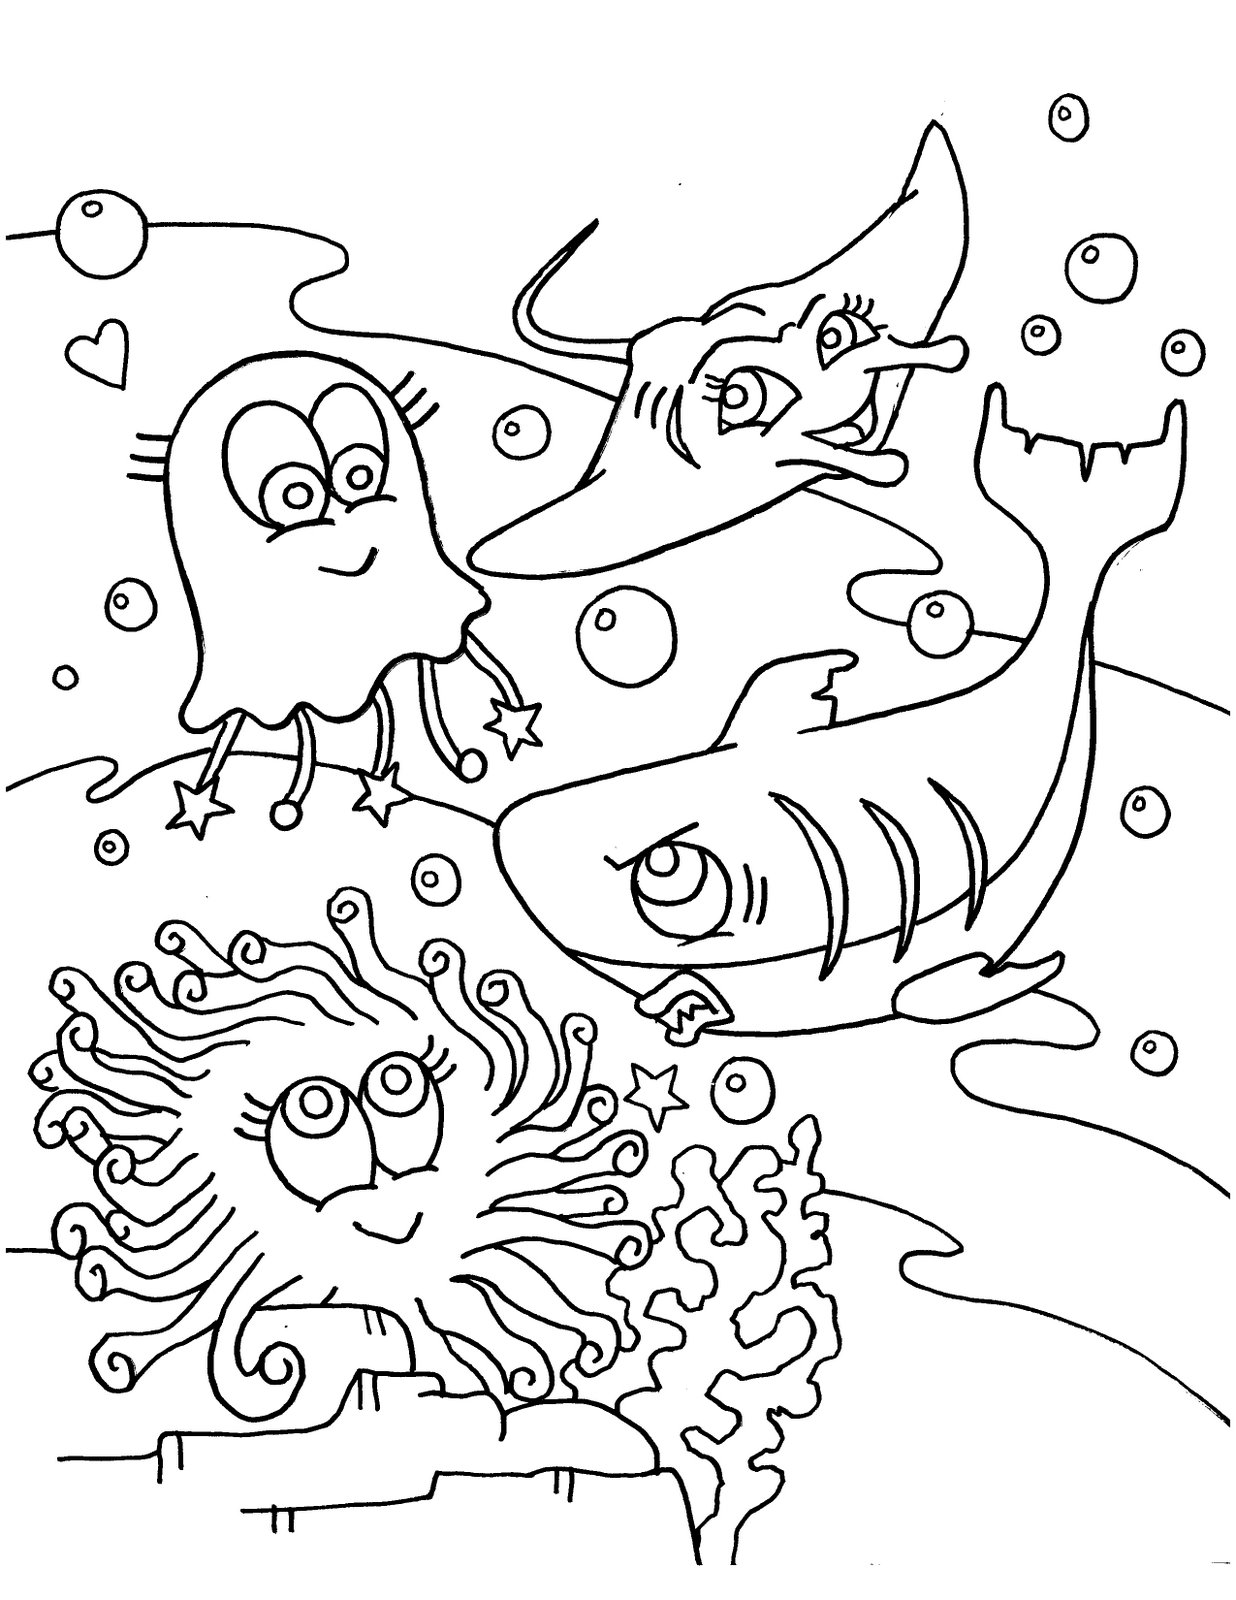 printable-under-the-sea-coloring-pages-under-the-sea-coloring-page-to